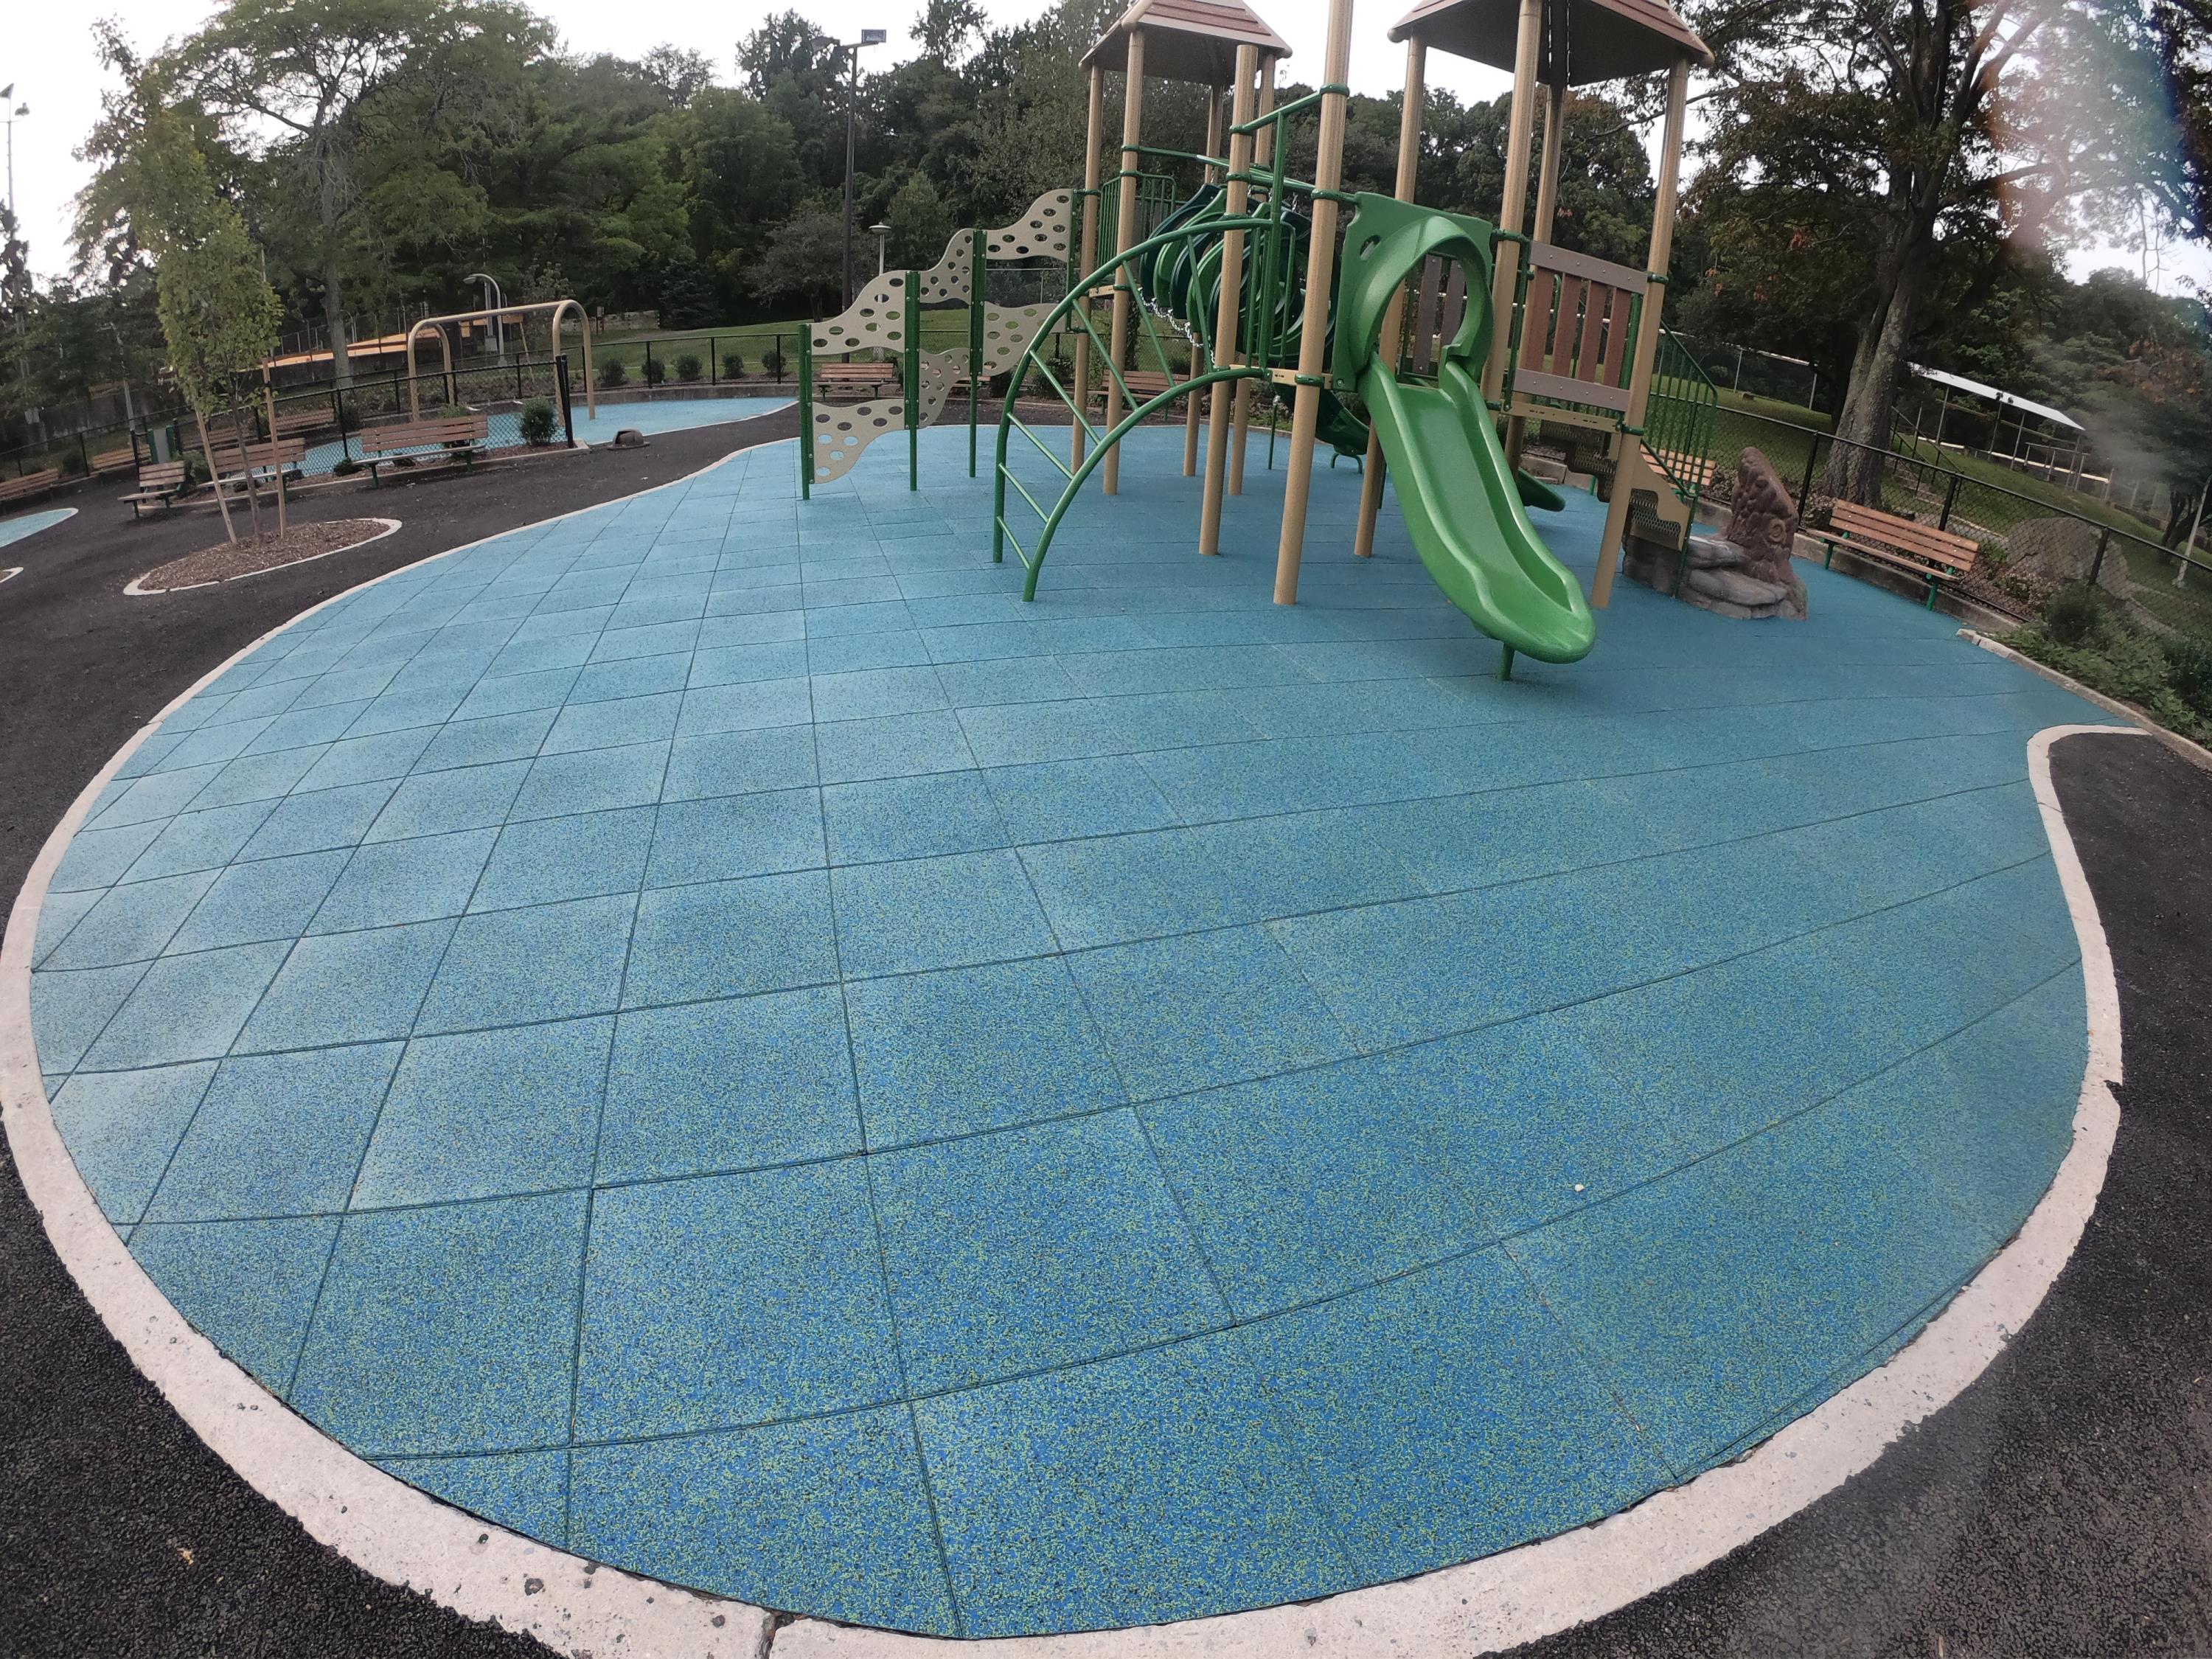 County Park Playground = Using TPV Top Tiles w50% Blue 45% Green 5% Black t